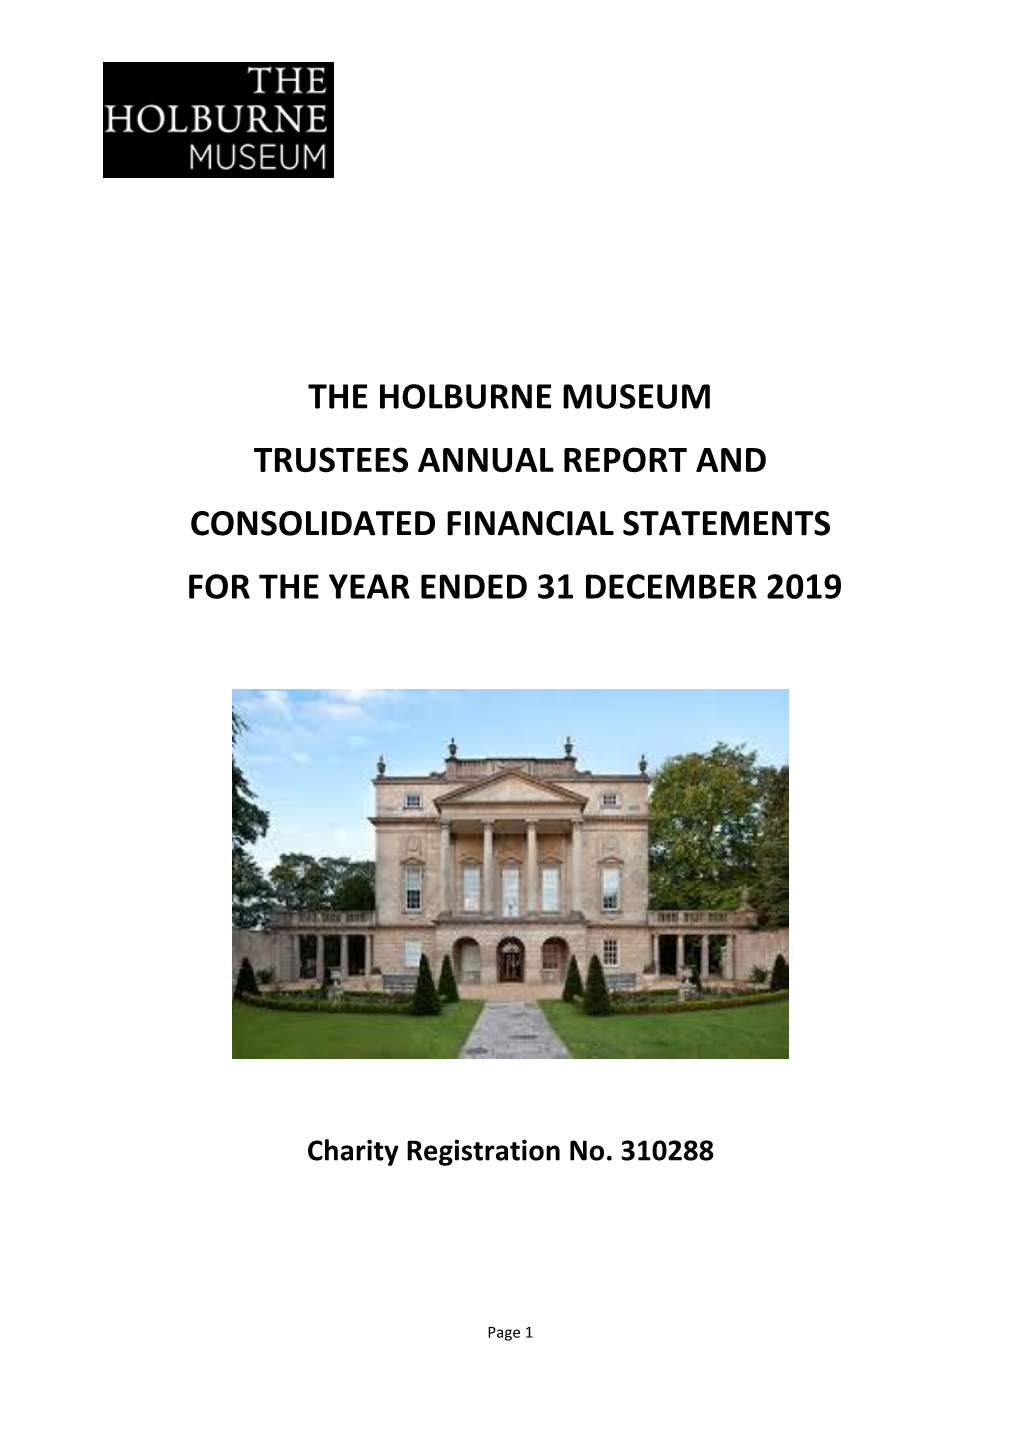 The Holburne Museum Trustees Annual Report and Consolidated Financial Statements for the Year Ended 31 December 2019